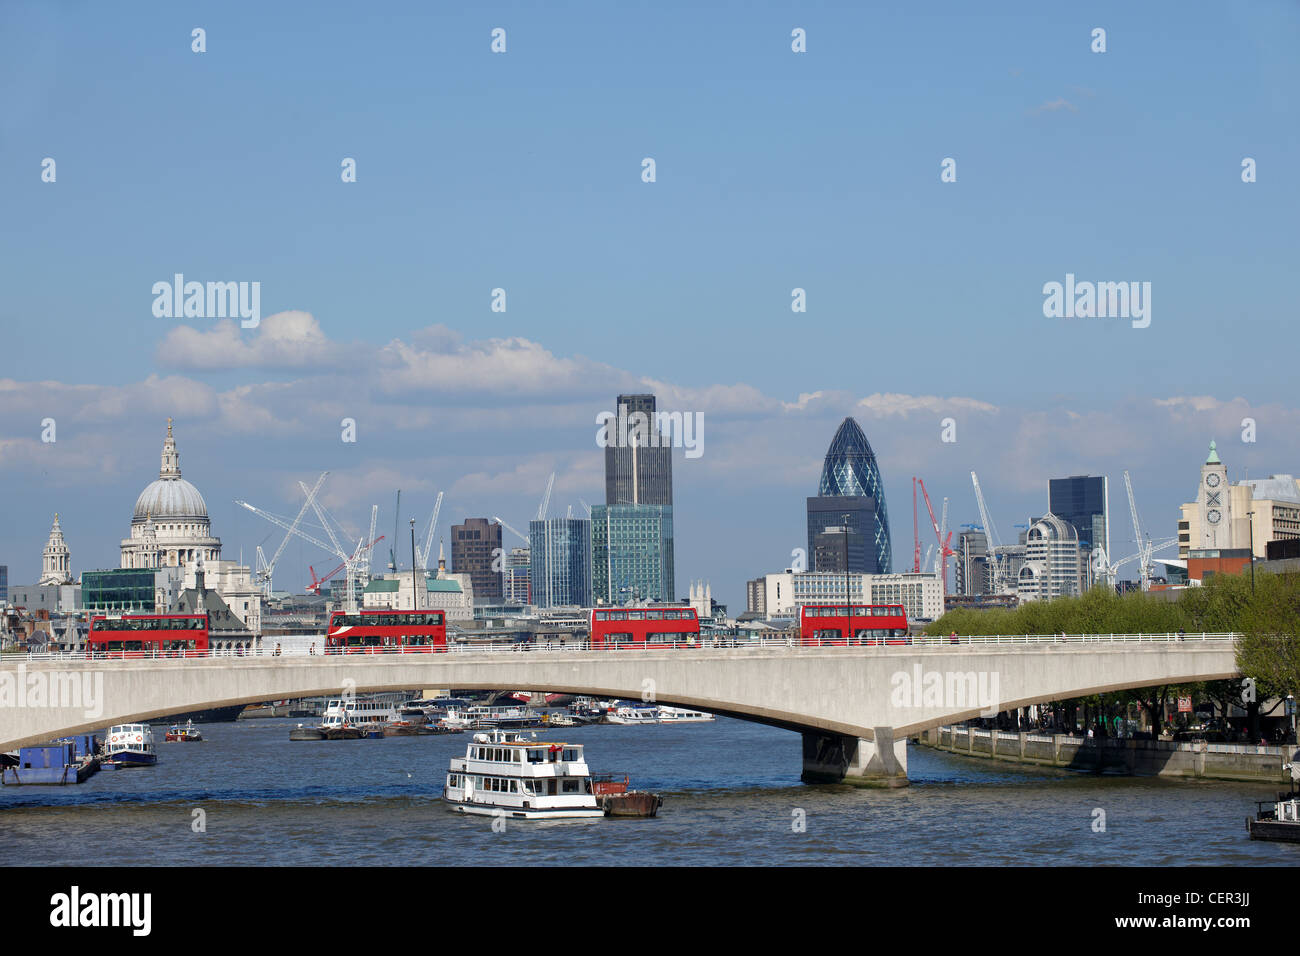 London Bridge with red buses and the city skyline. Stock Photo